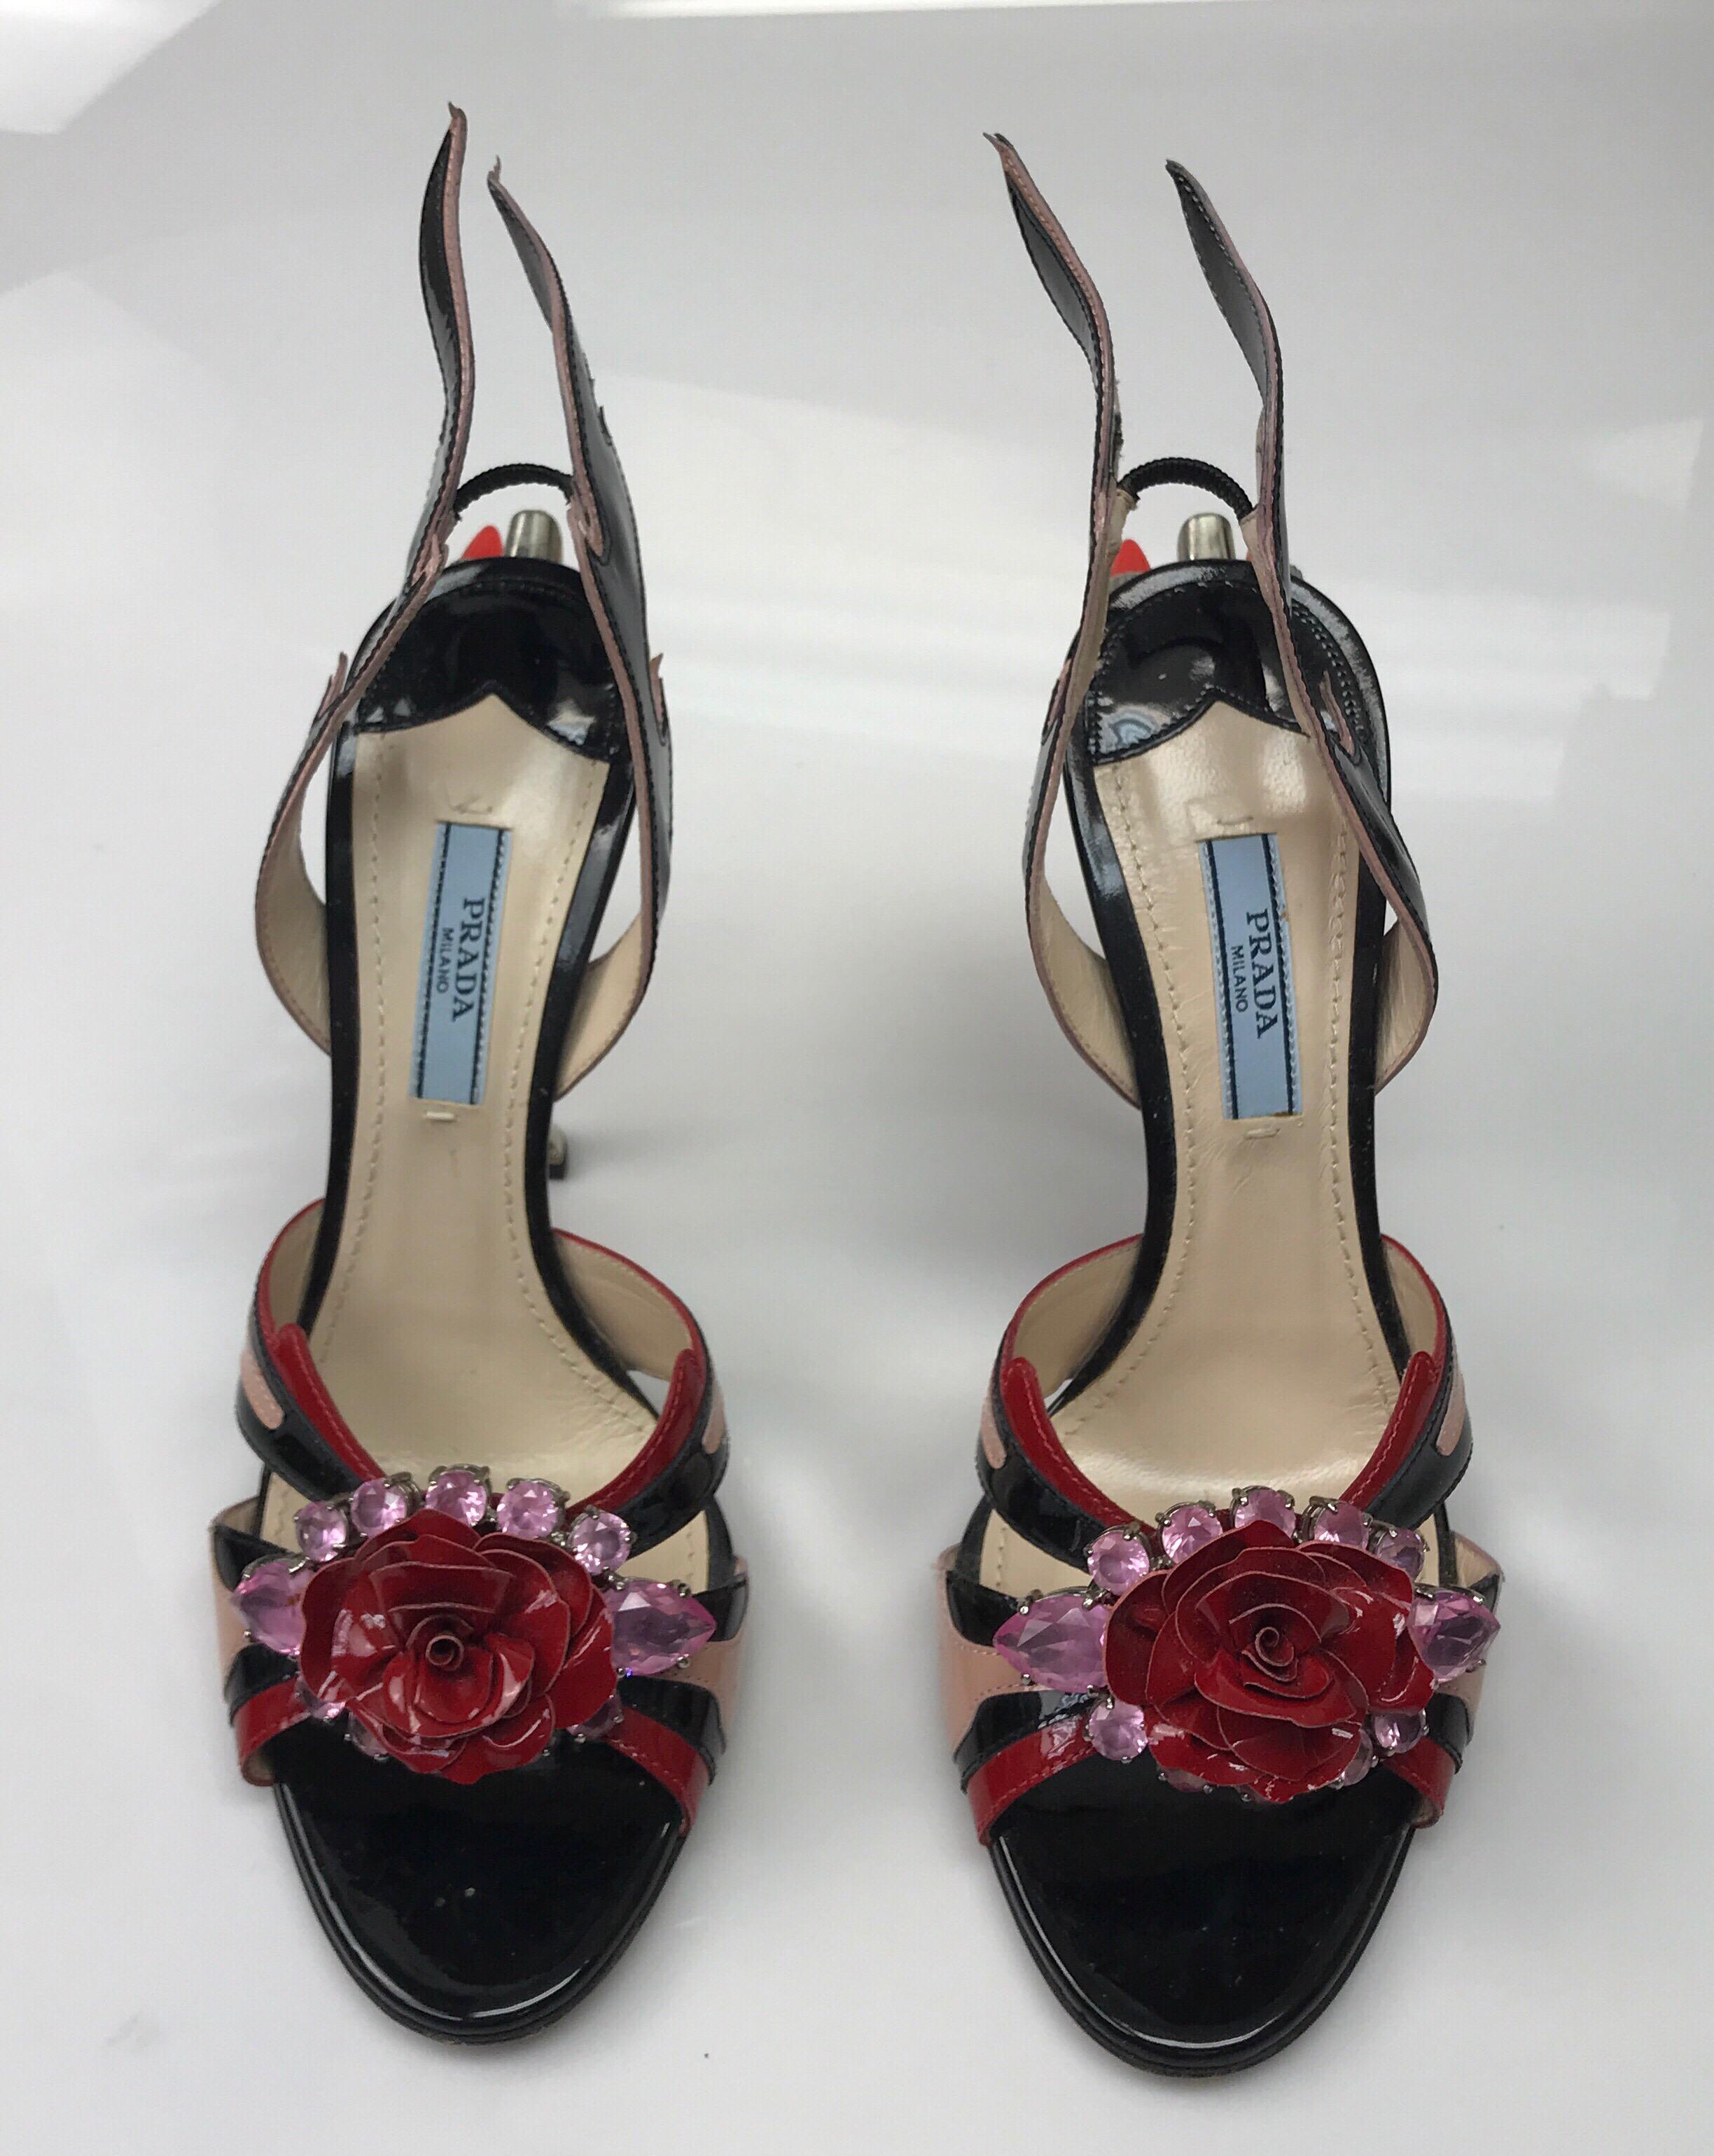 PRADA Black & Red Couture Jeweled Taillight Sandal-37.5. These beautiful Prada Couture heels are in excellent condition. They only show slight tarnishing at the top of the silver heel. They are made of black, red, and pink patent lather with pink